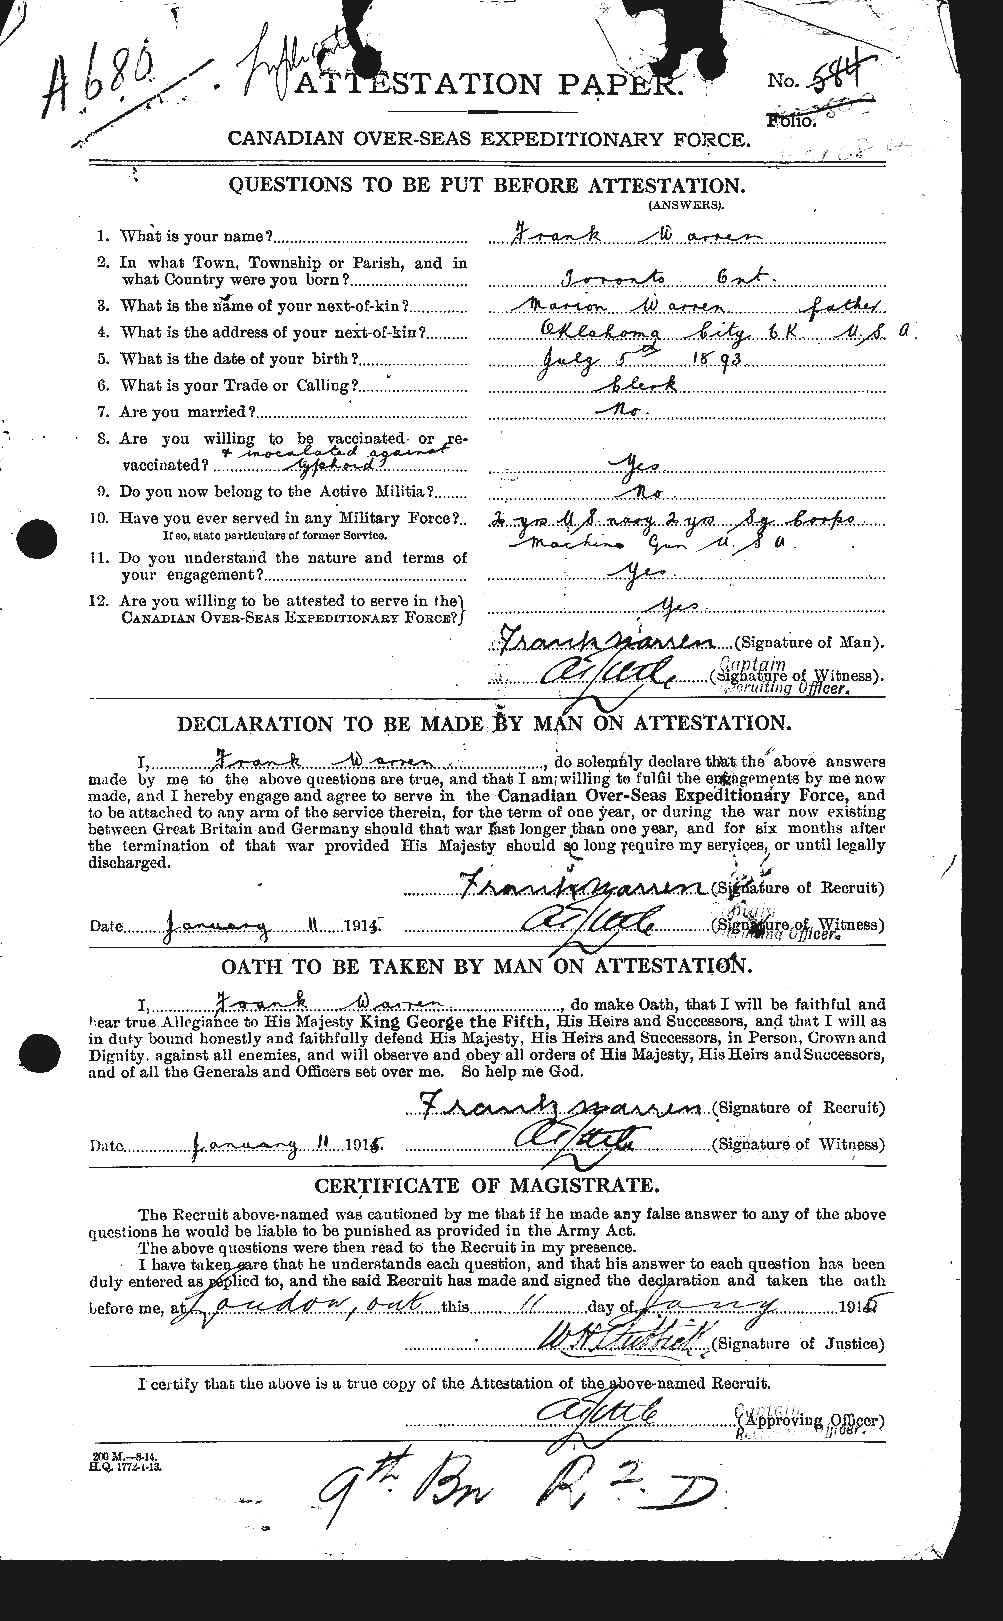 Personnel Records of the First World War - CEF 658432a